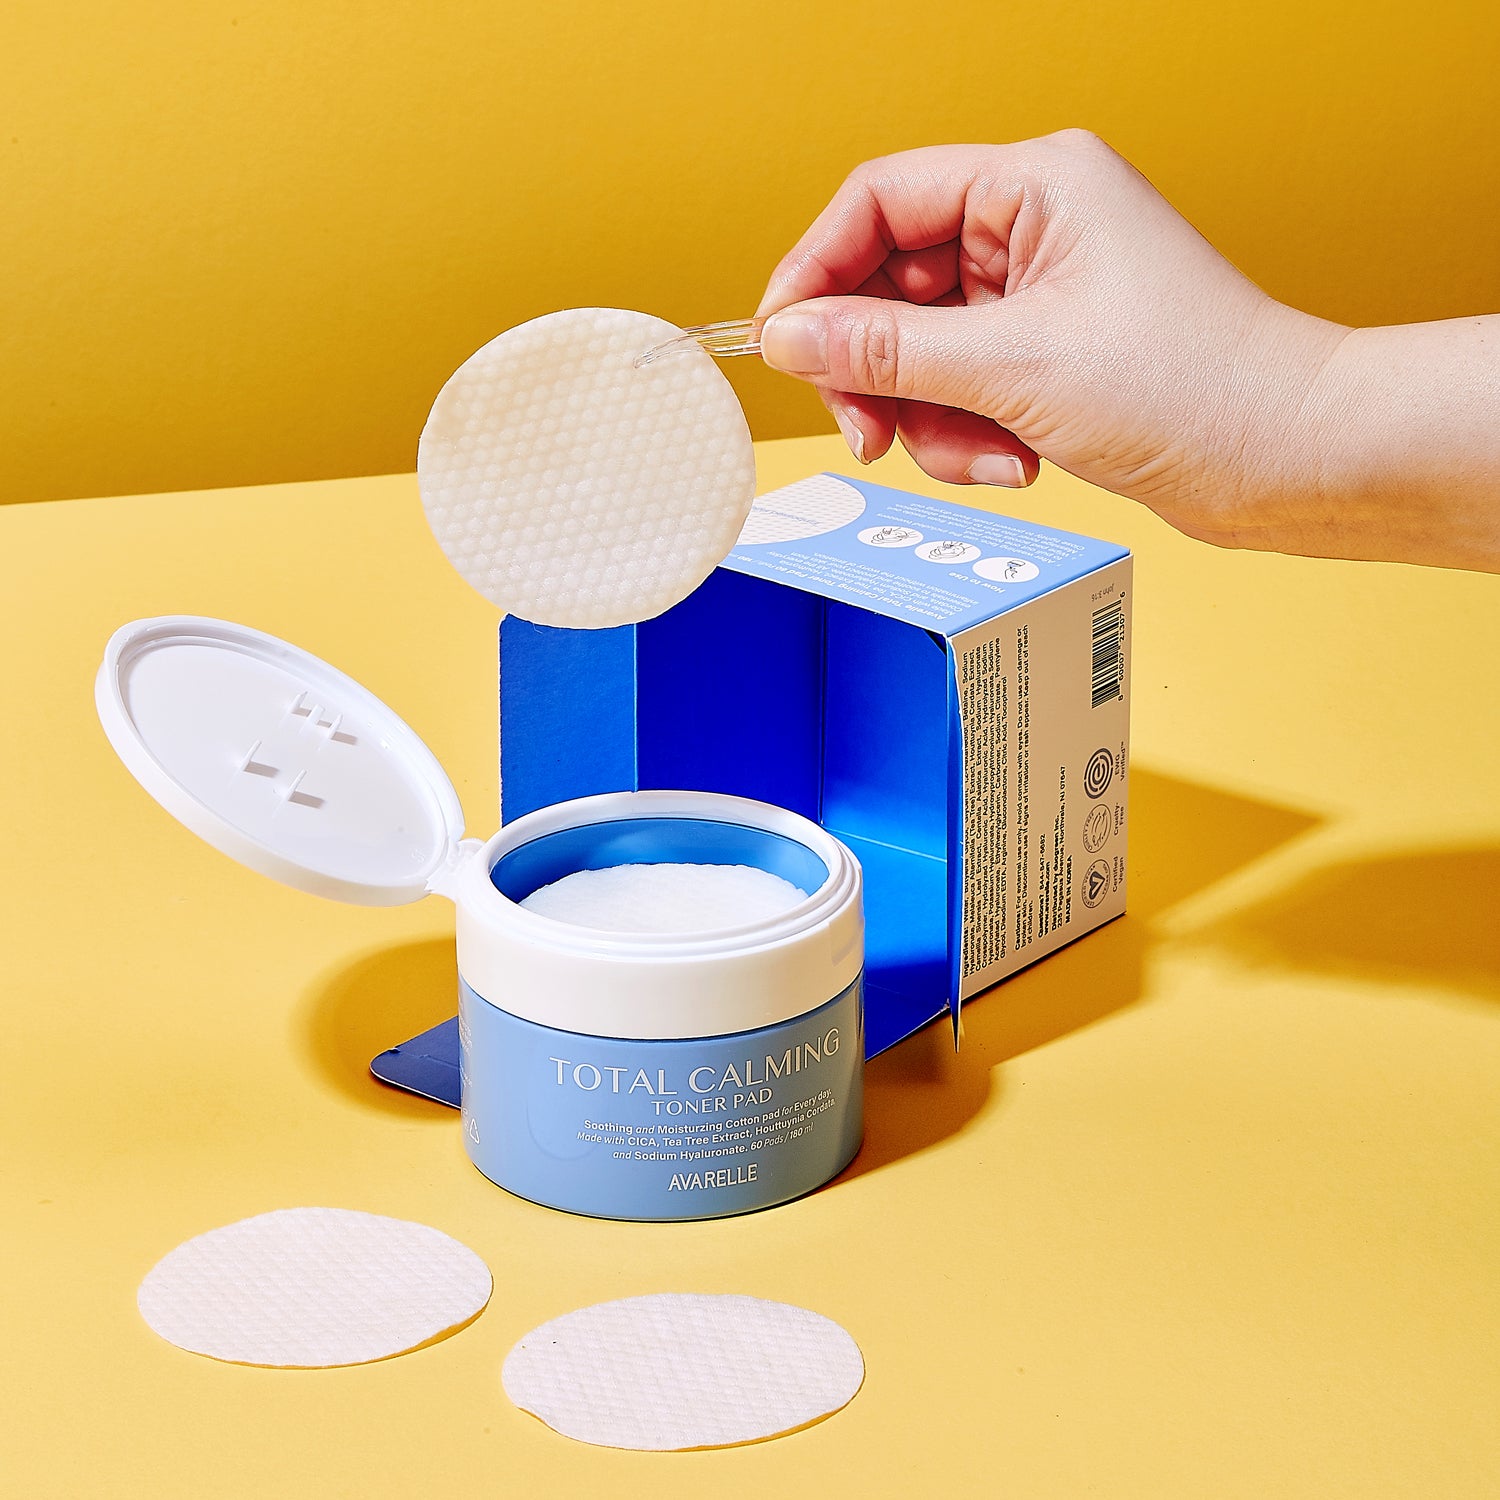 A hand holds a one of Avarelle's Total Calming Toner pads with a tweezer above an open jar of Avarelle's Total Calming Toner Pads. That contains AHA & PHA exfoliating toner pads next to its box on a yellow surface.